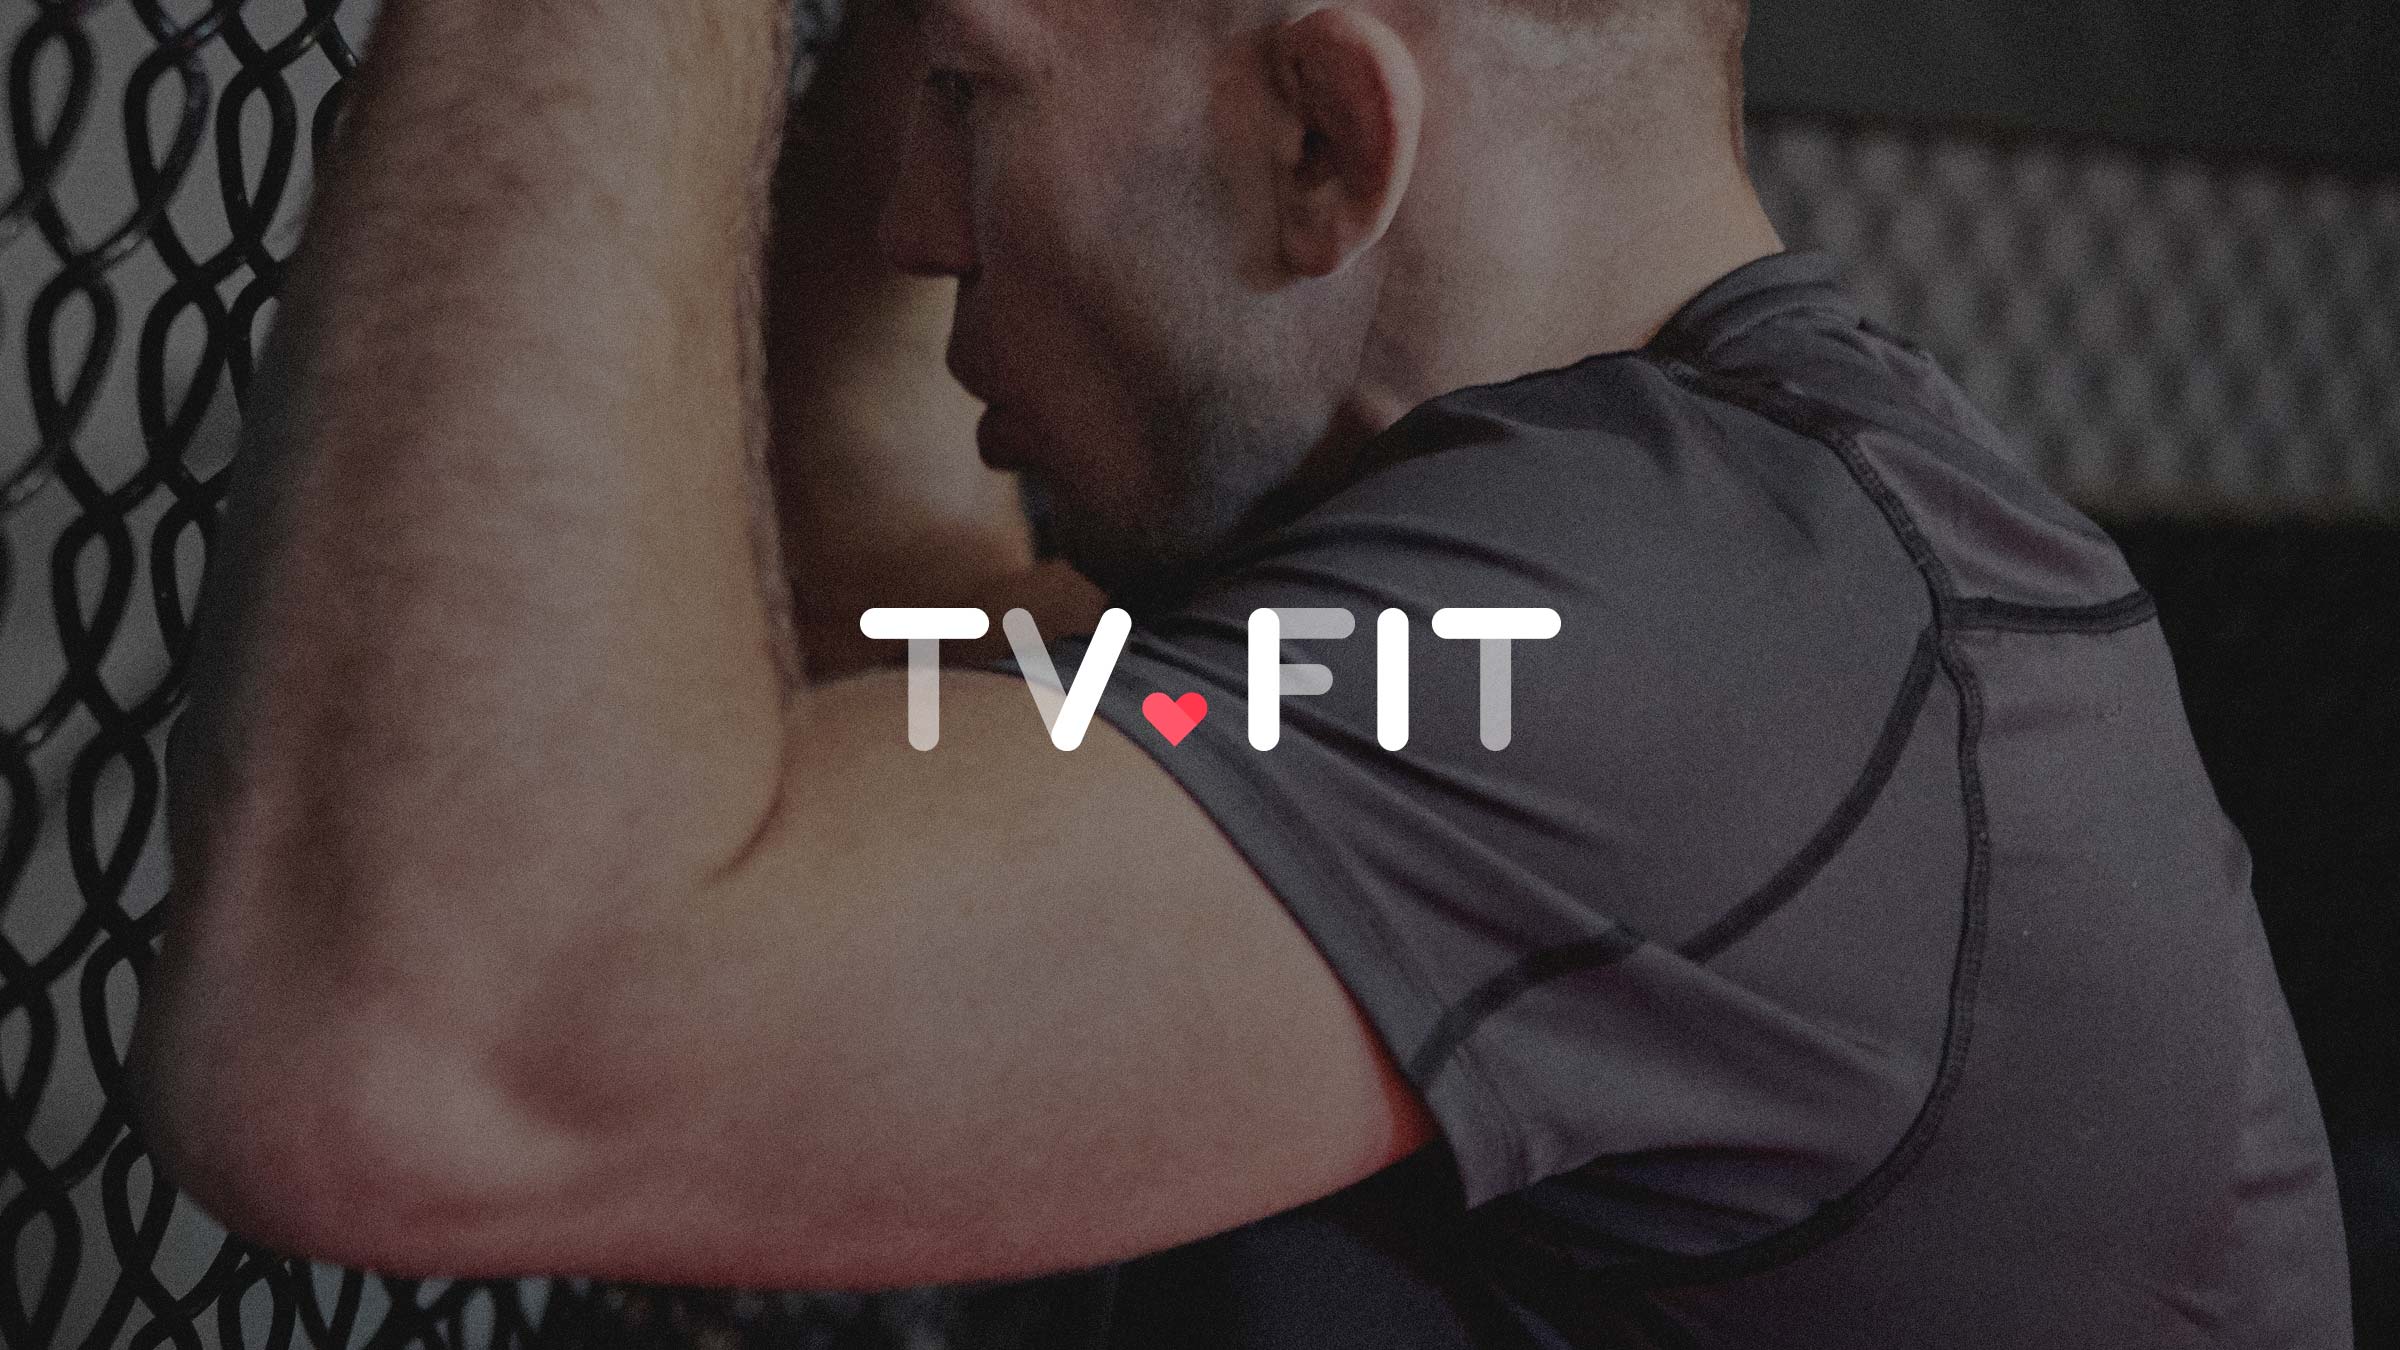 TV.fit art direction featuring Georges St Pierre by Monumentum Brands